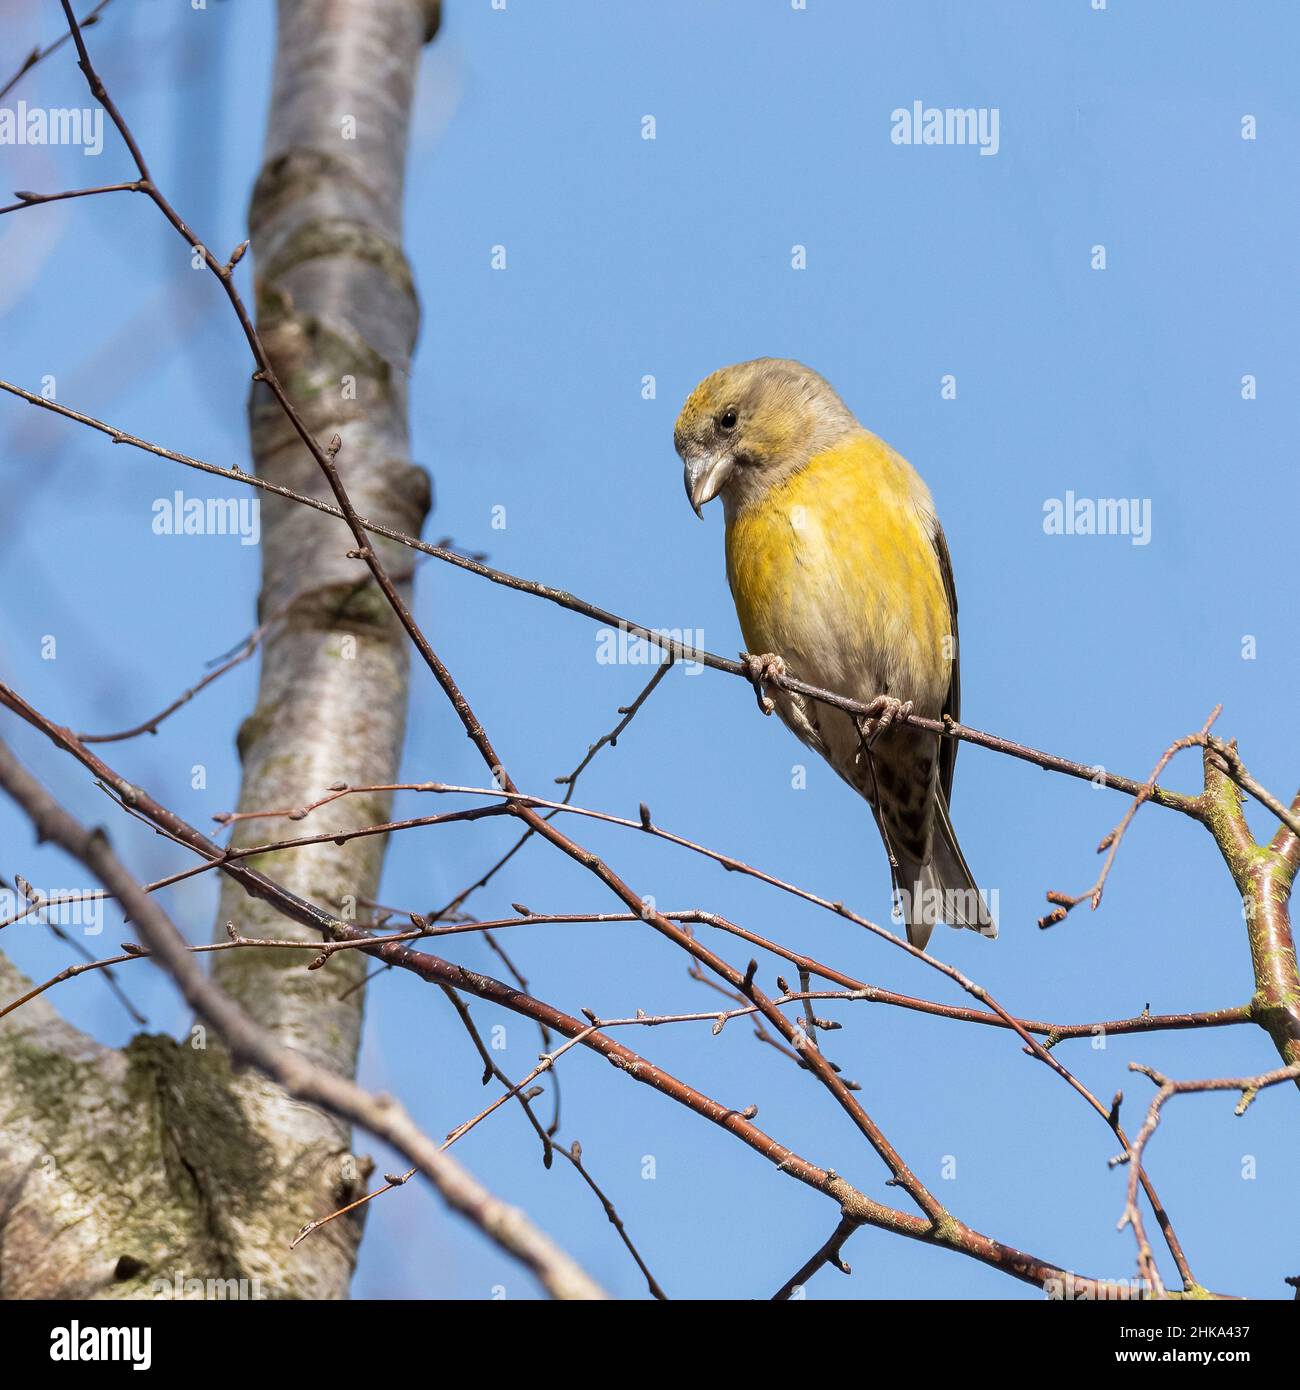 Female Crossbill Perched on Branch Stock Photo